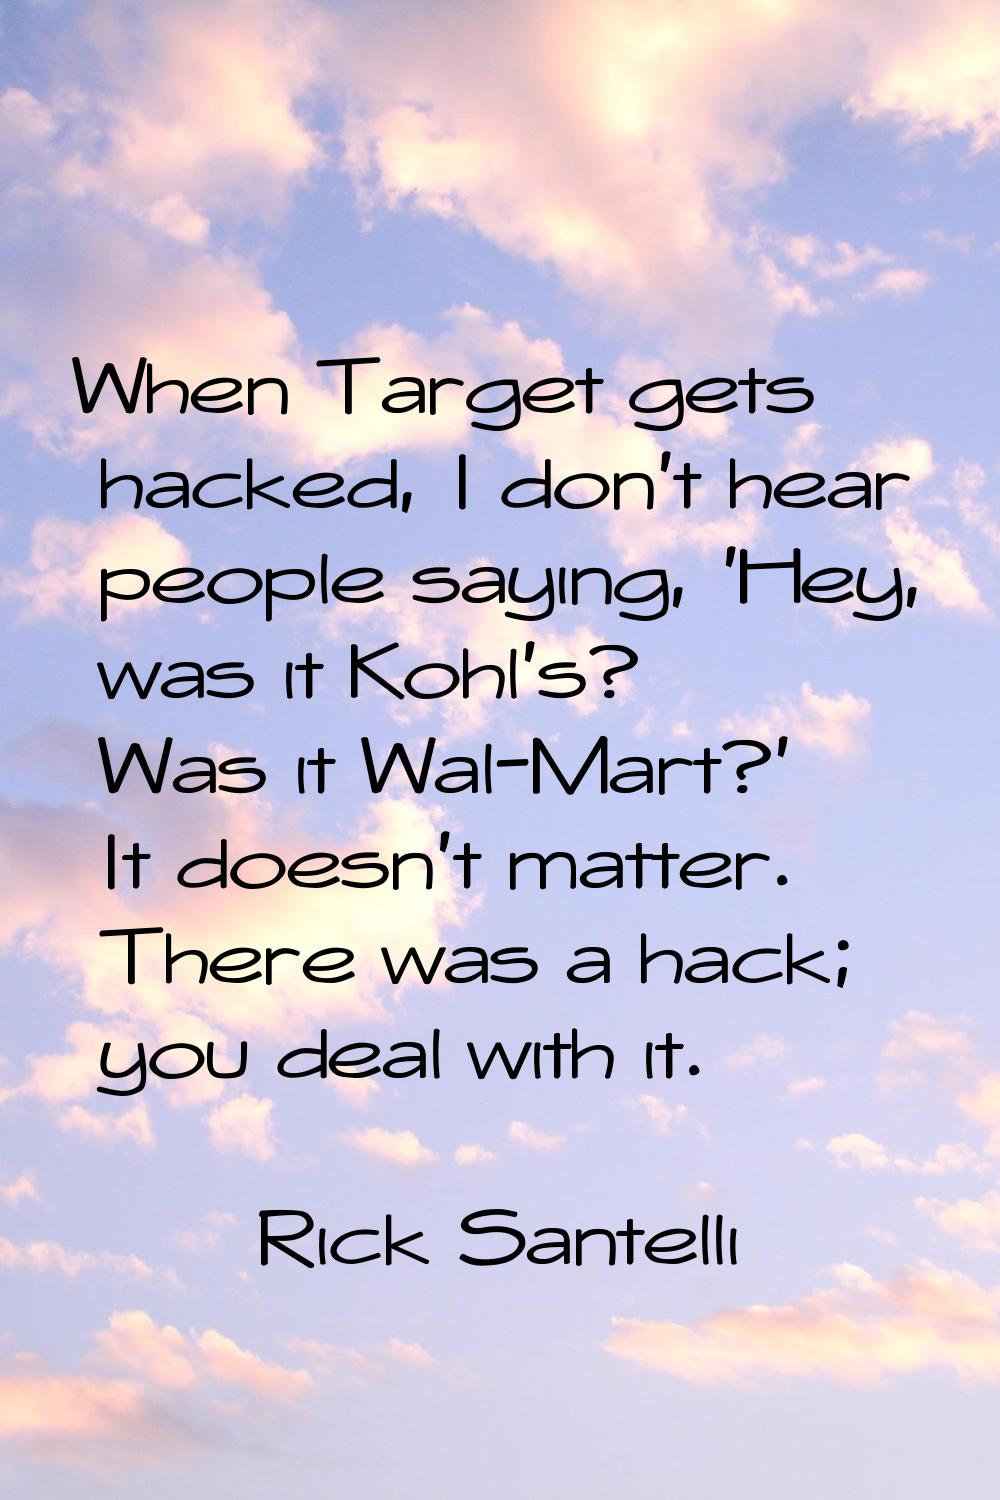 When Target gets hacked, I don't hear people saying, 'Hey, was it Kohl's? Was it Wal-Mart?' It does